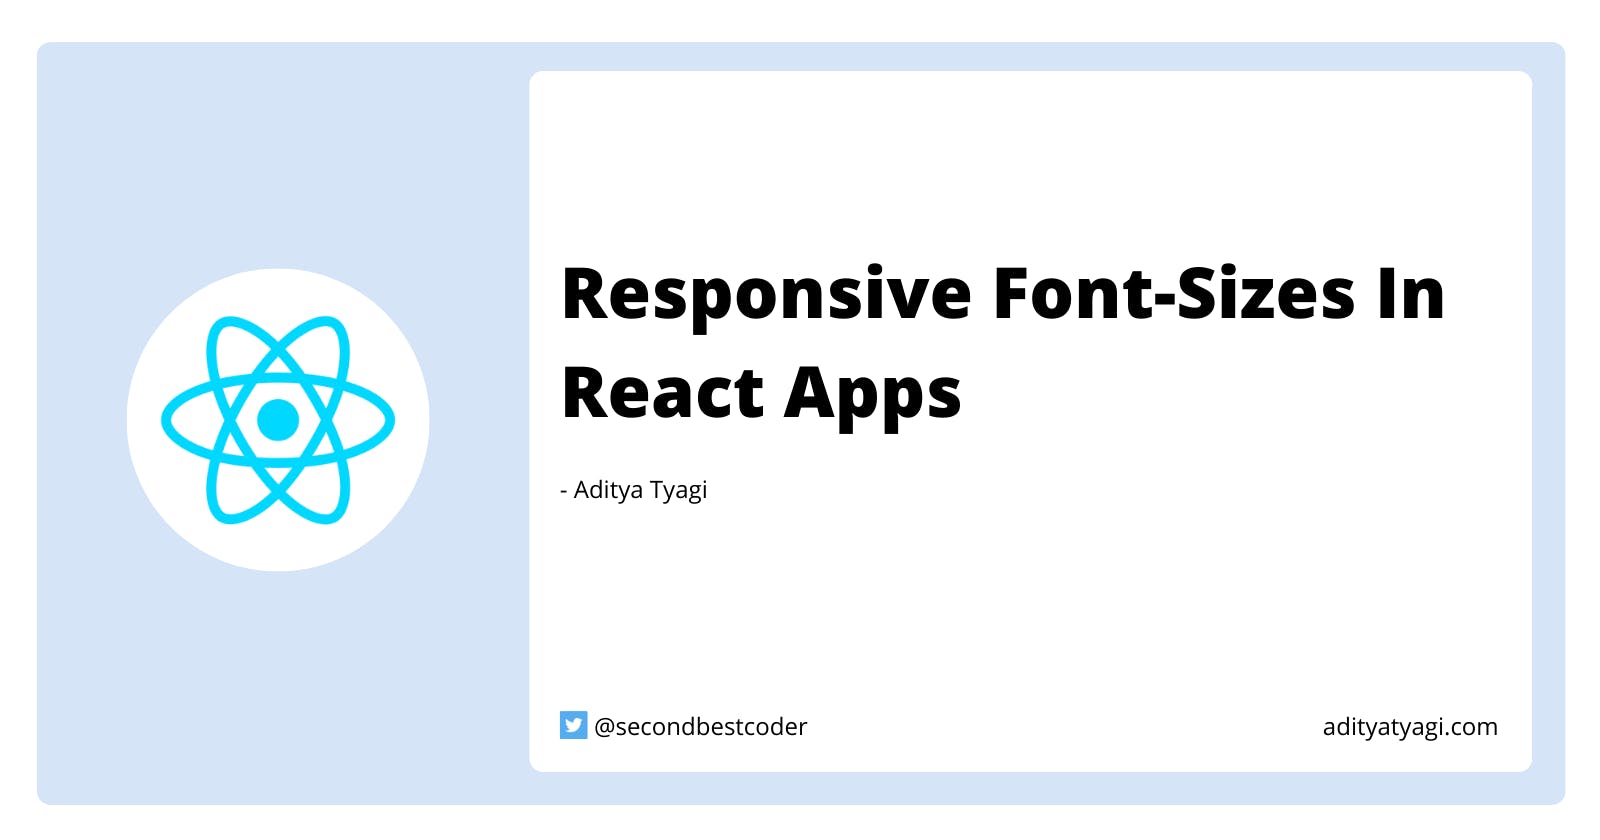 Responsive Font-Sizes In React Apps